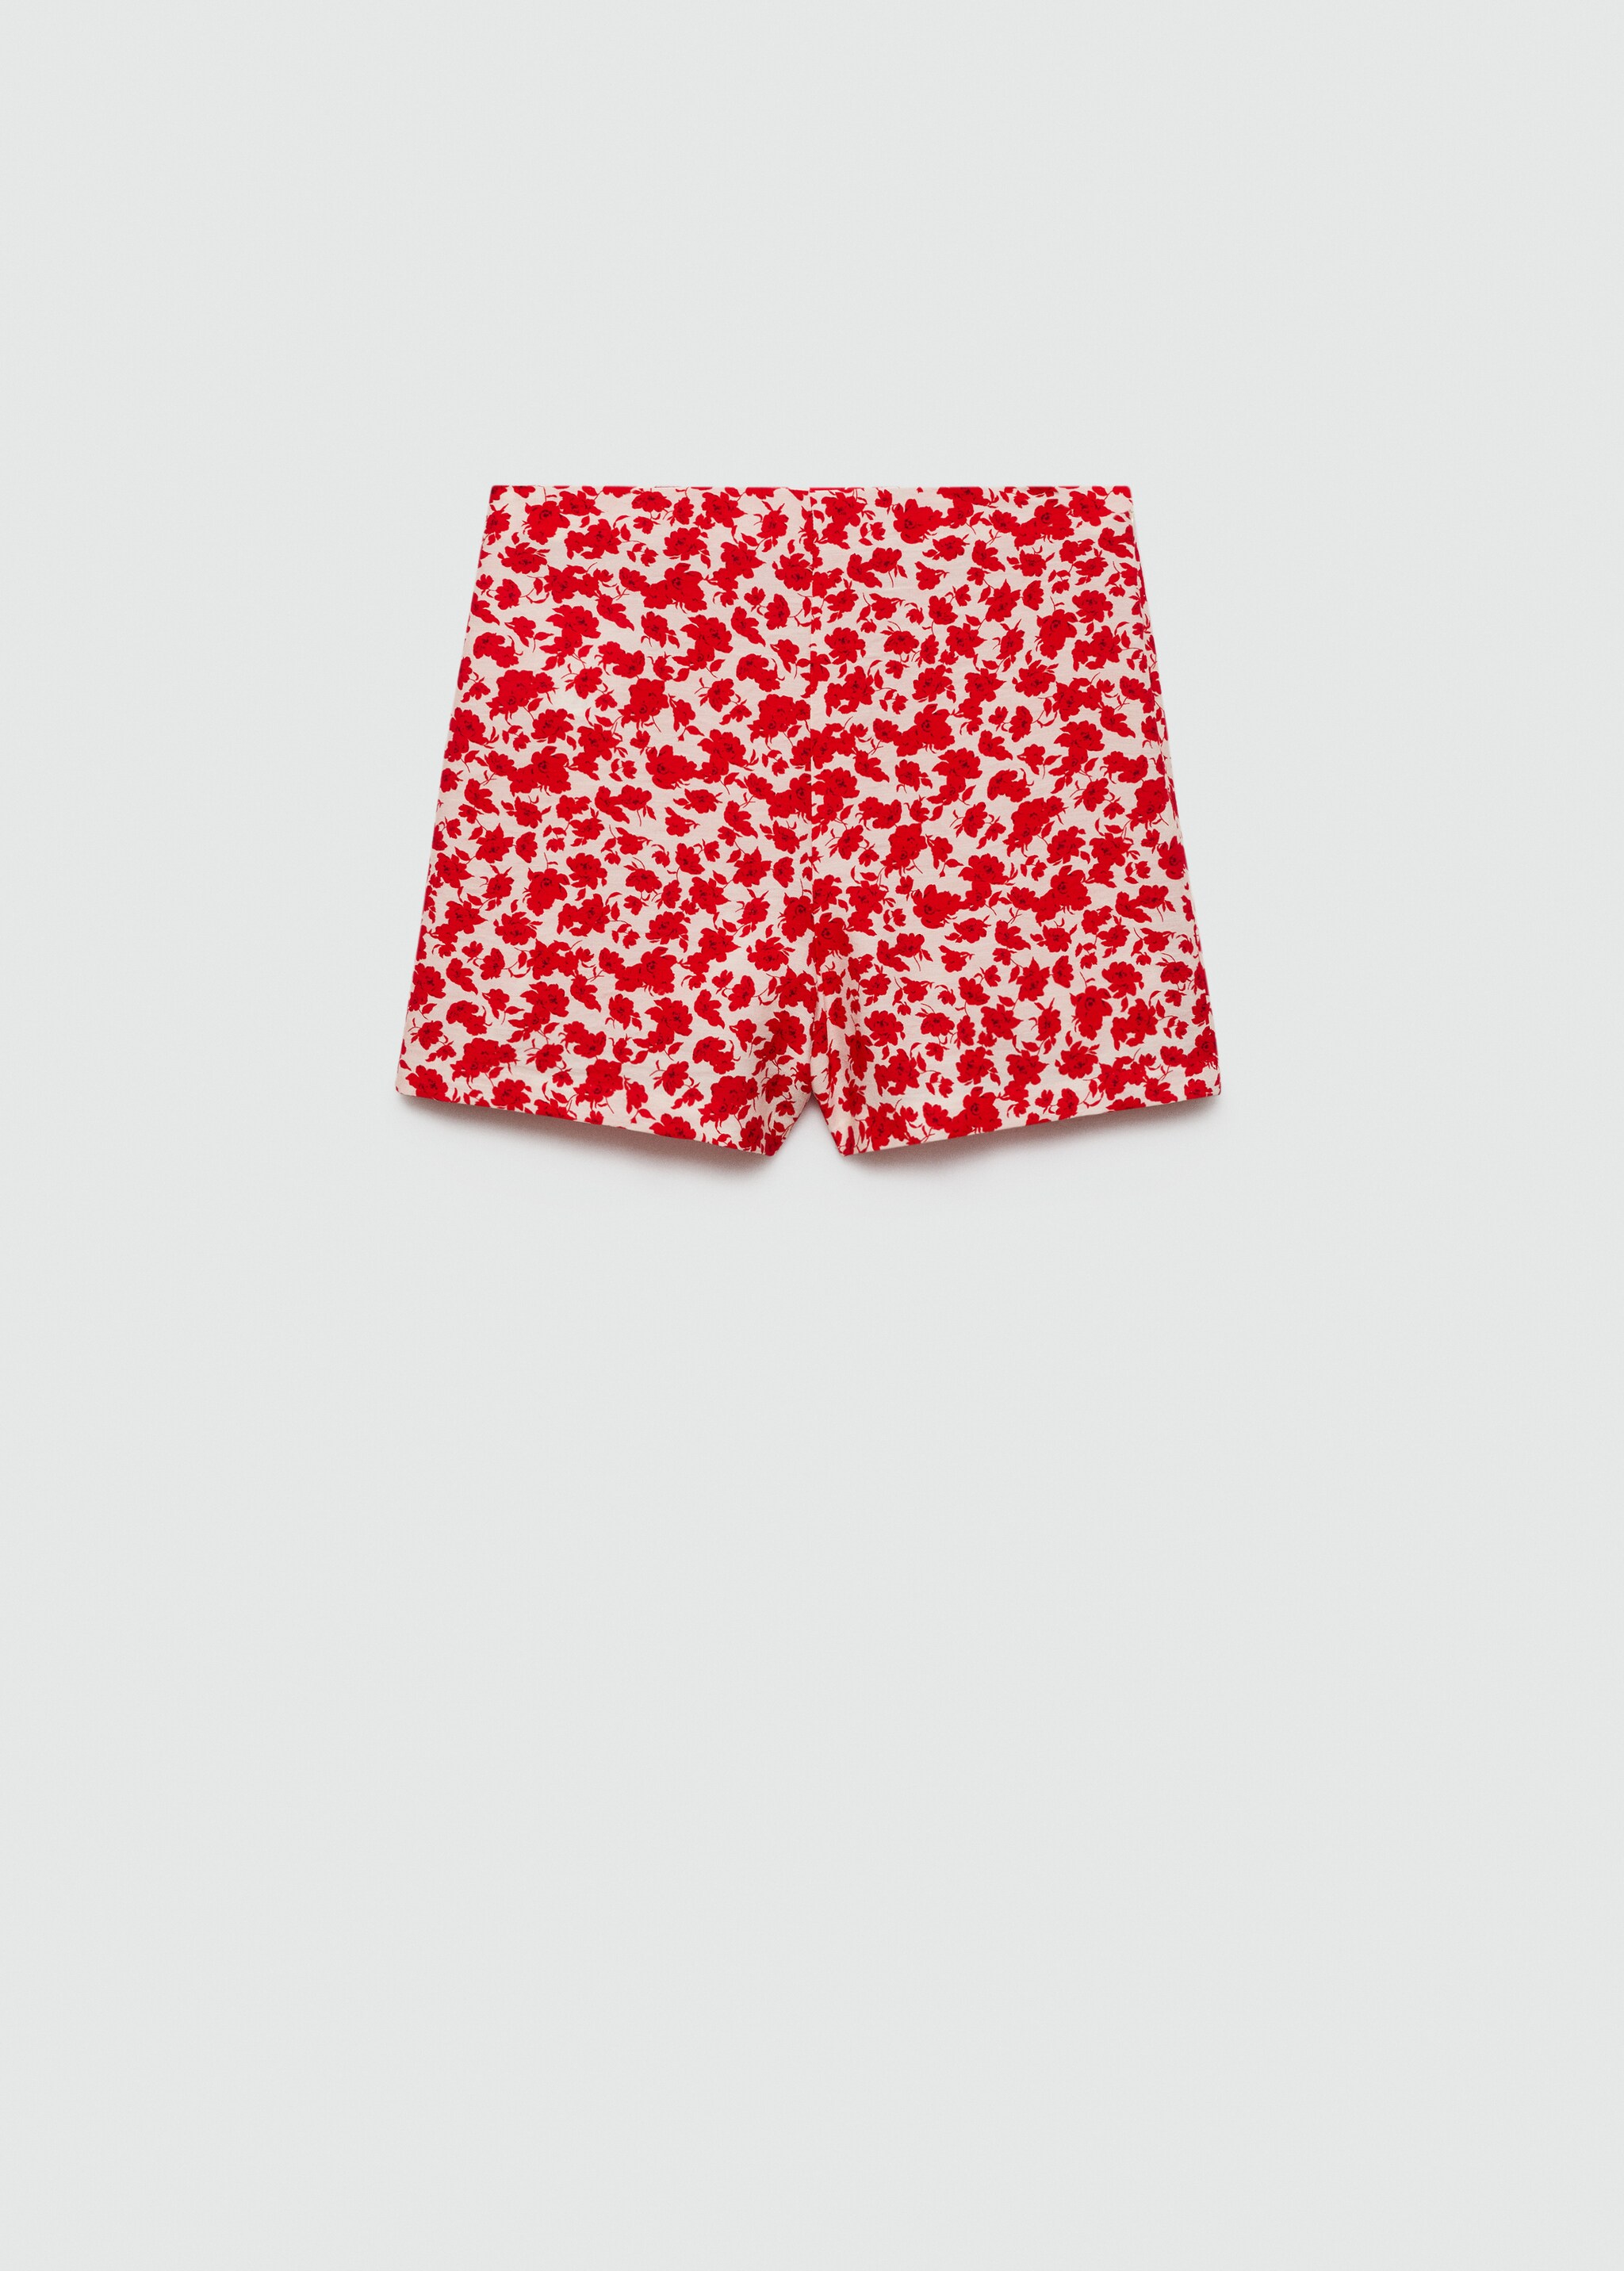 Straight shorts floral print - Article without model